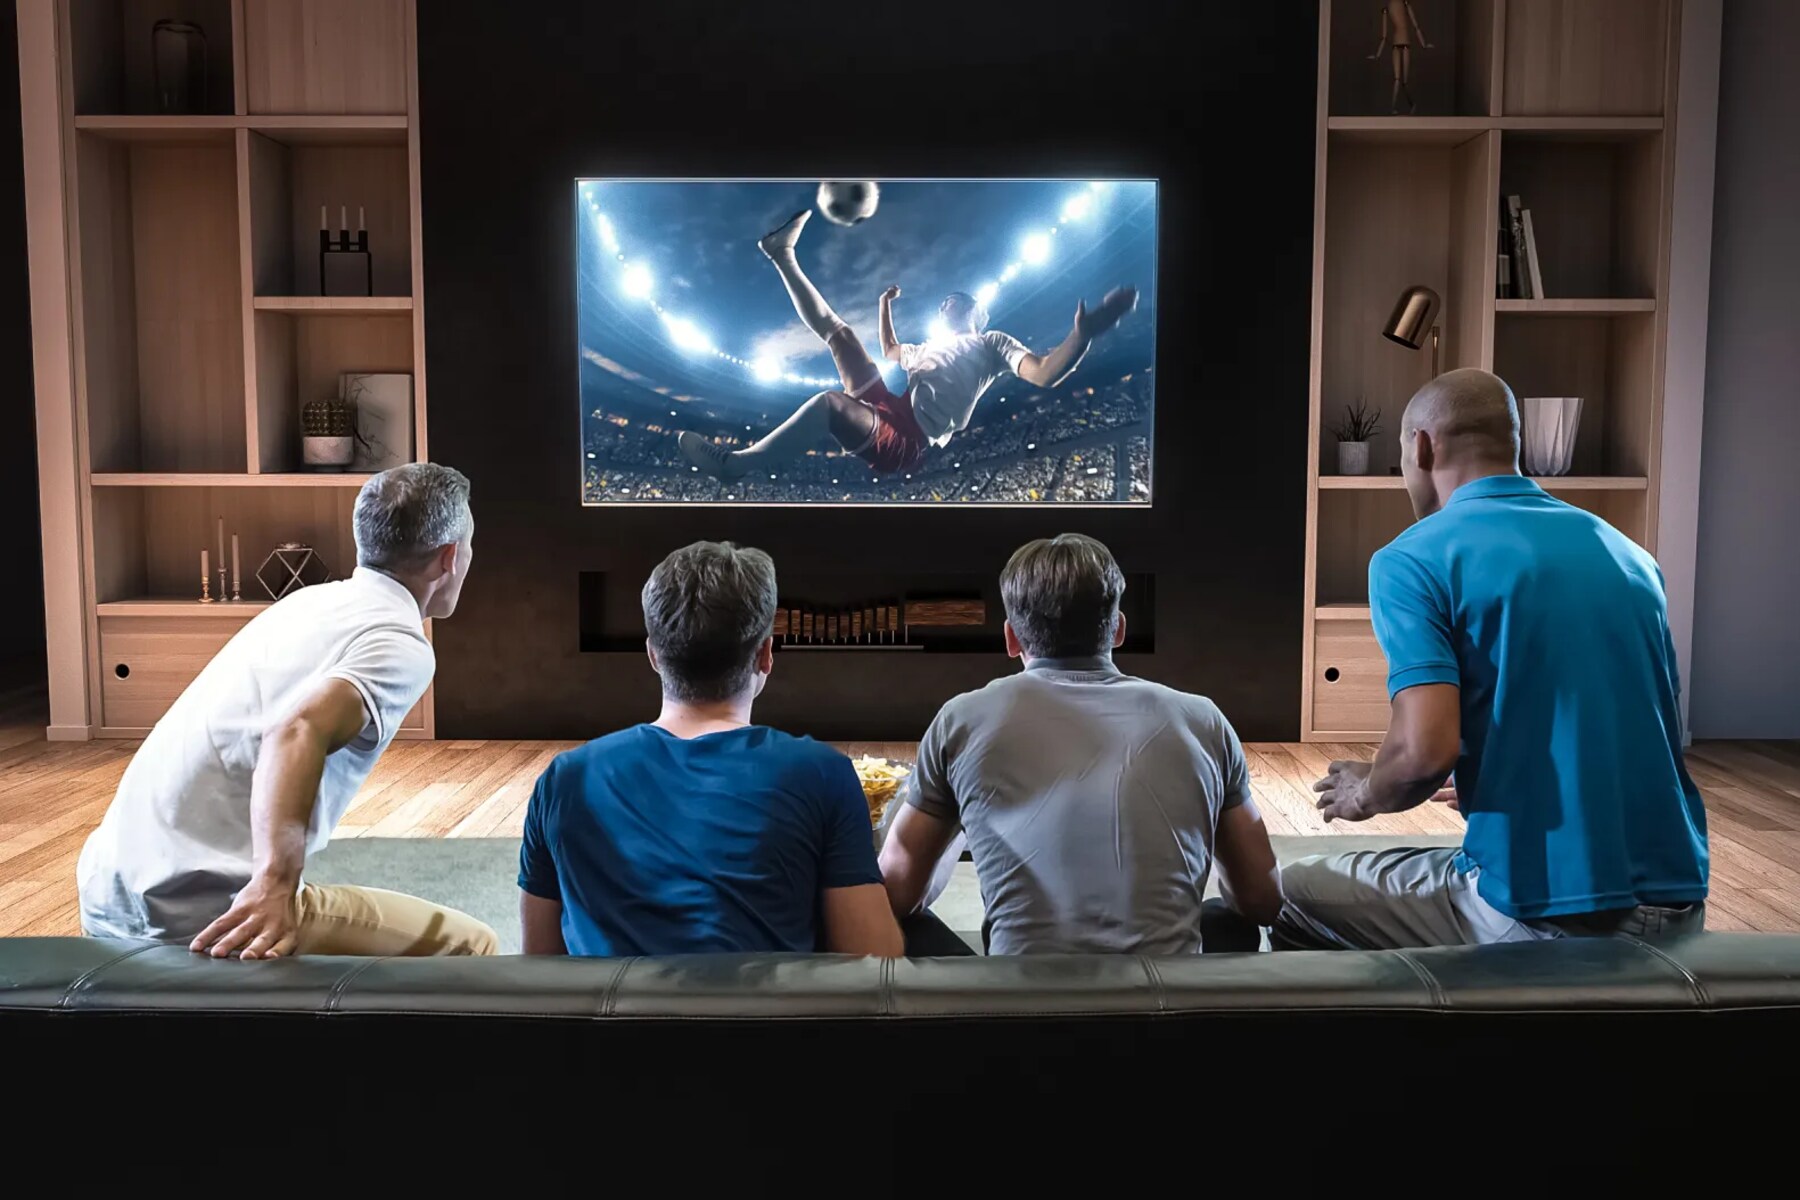 How To Stream Sports On My Samsung QLED TV